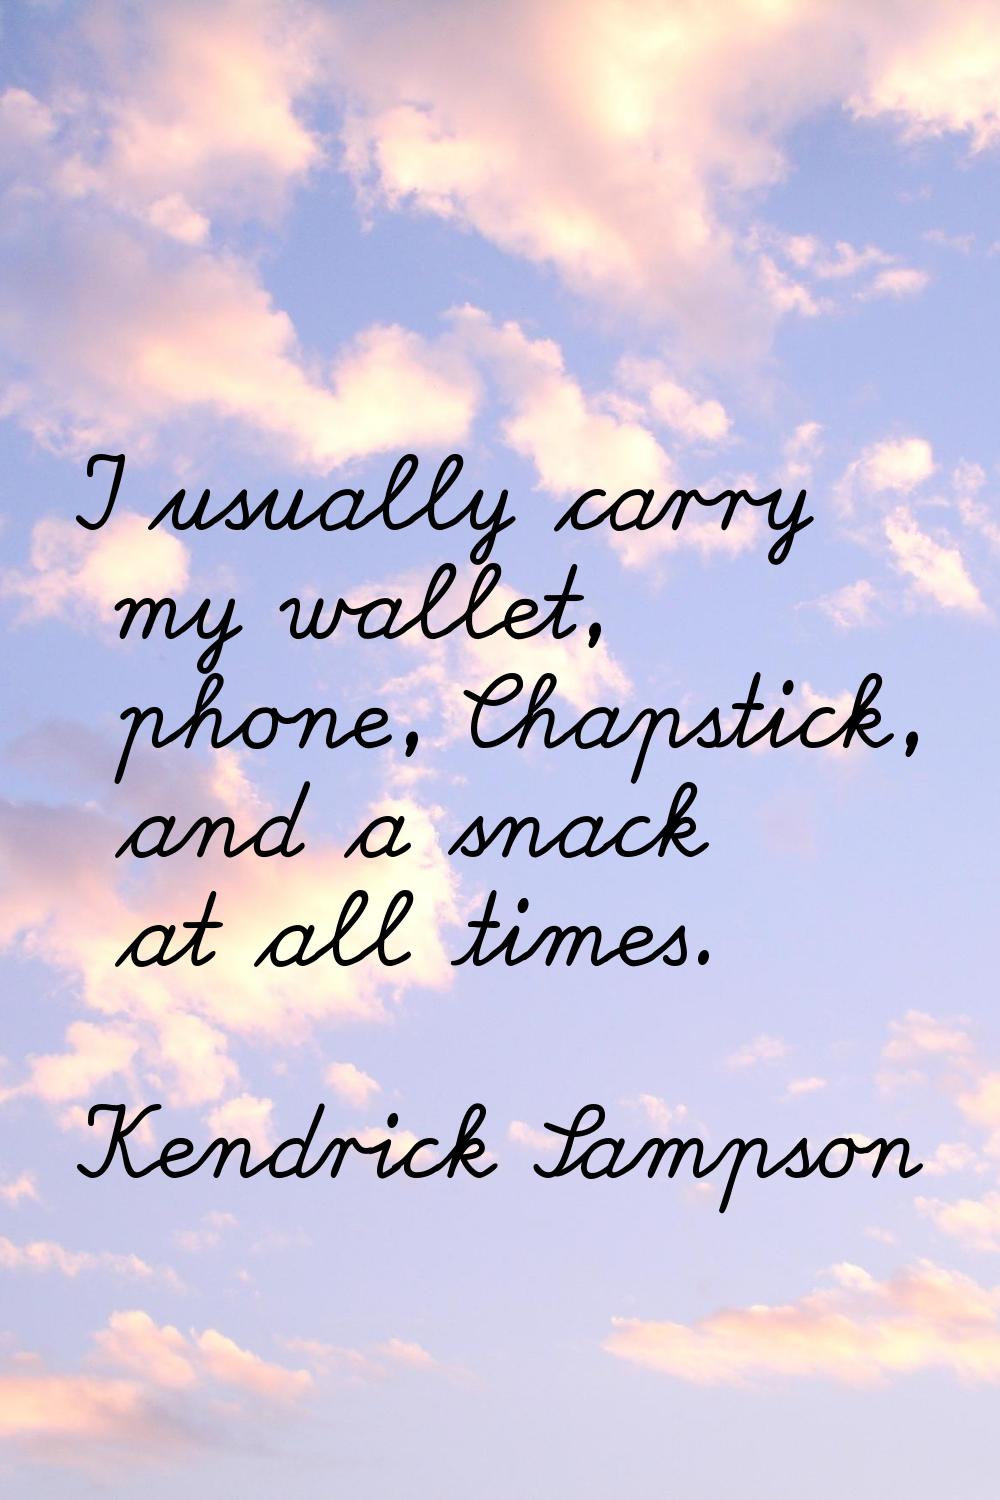 I usually carry my wallet, phone, Chapstick, and a snack at all times.